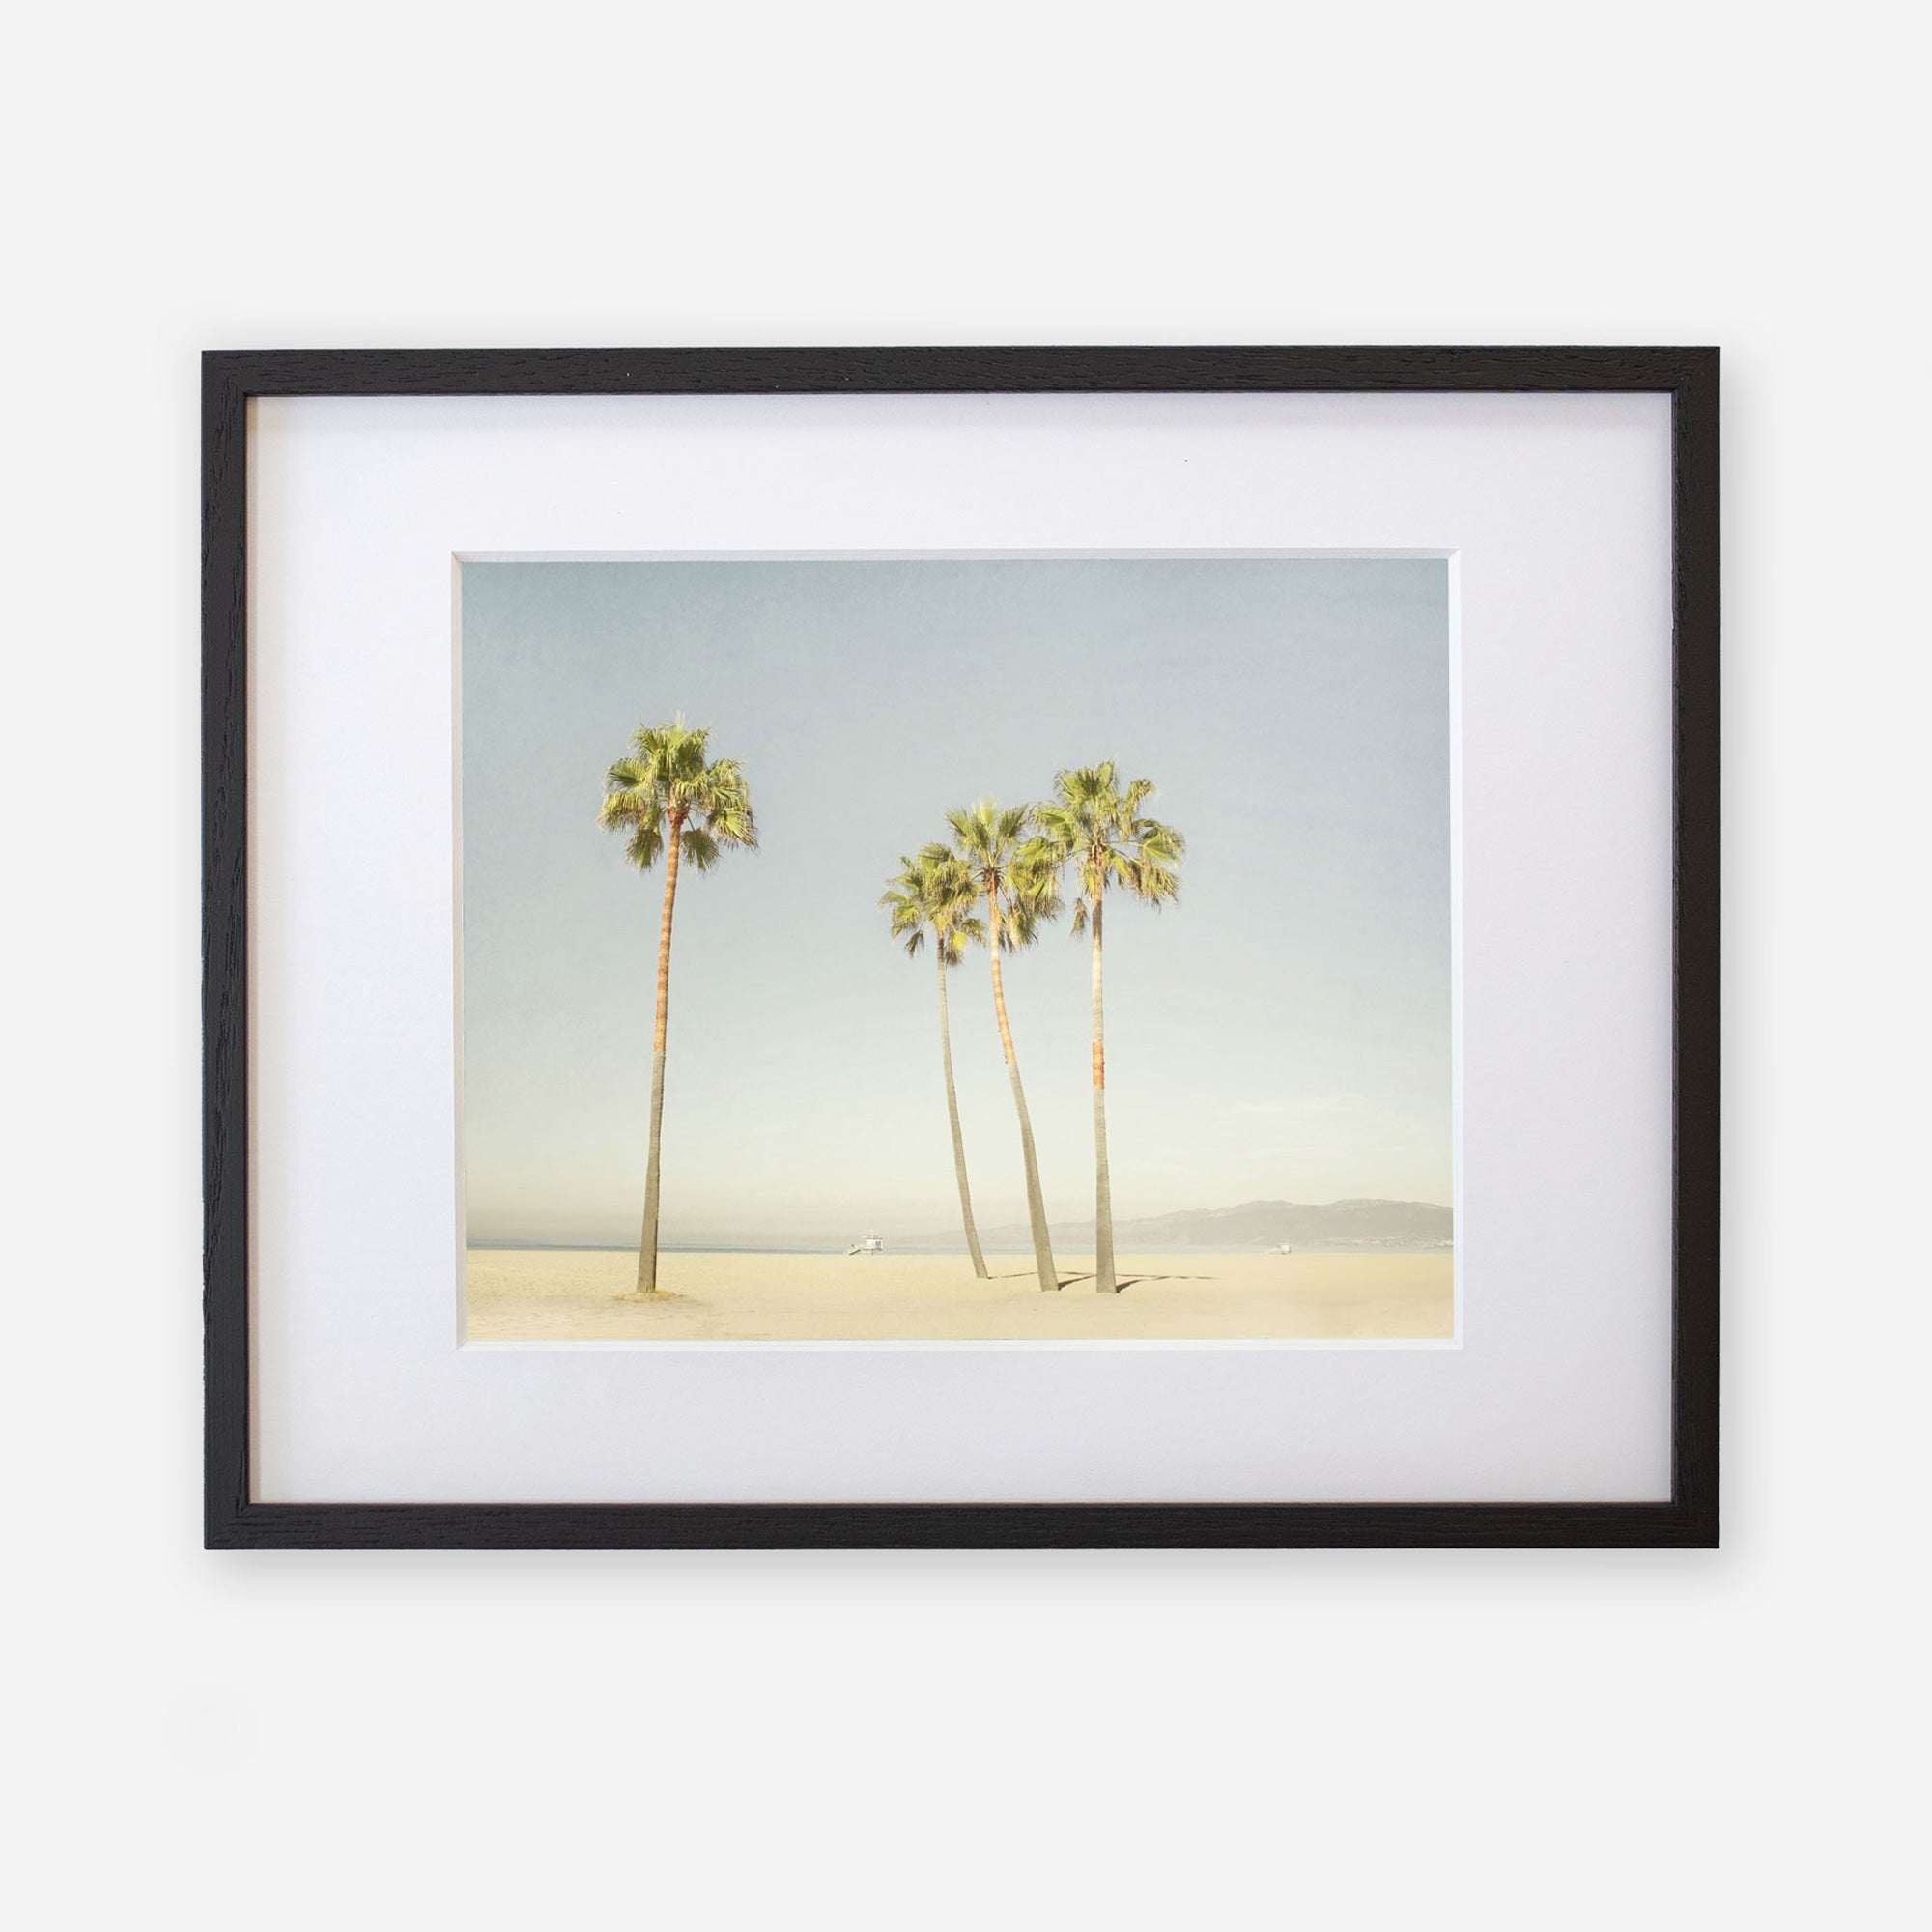 A framed photograph of five tall palm trees on a sunny, sandy beach at California Venice Beach, displayed against a clear sky. The frame is black with a white mat. Offley Green&#39;s &#39;Boardwalk Palms&#39; print.